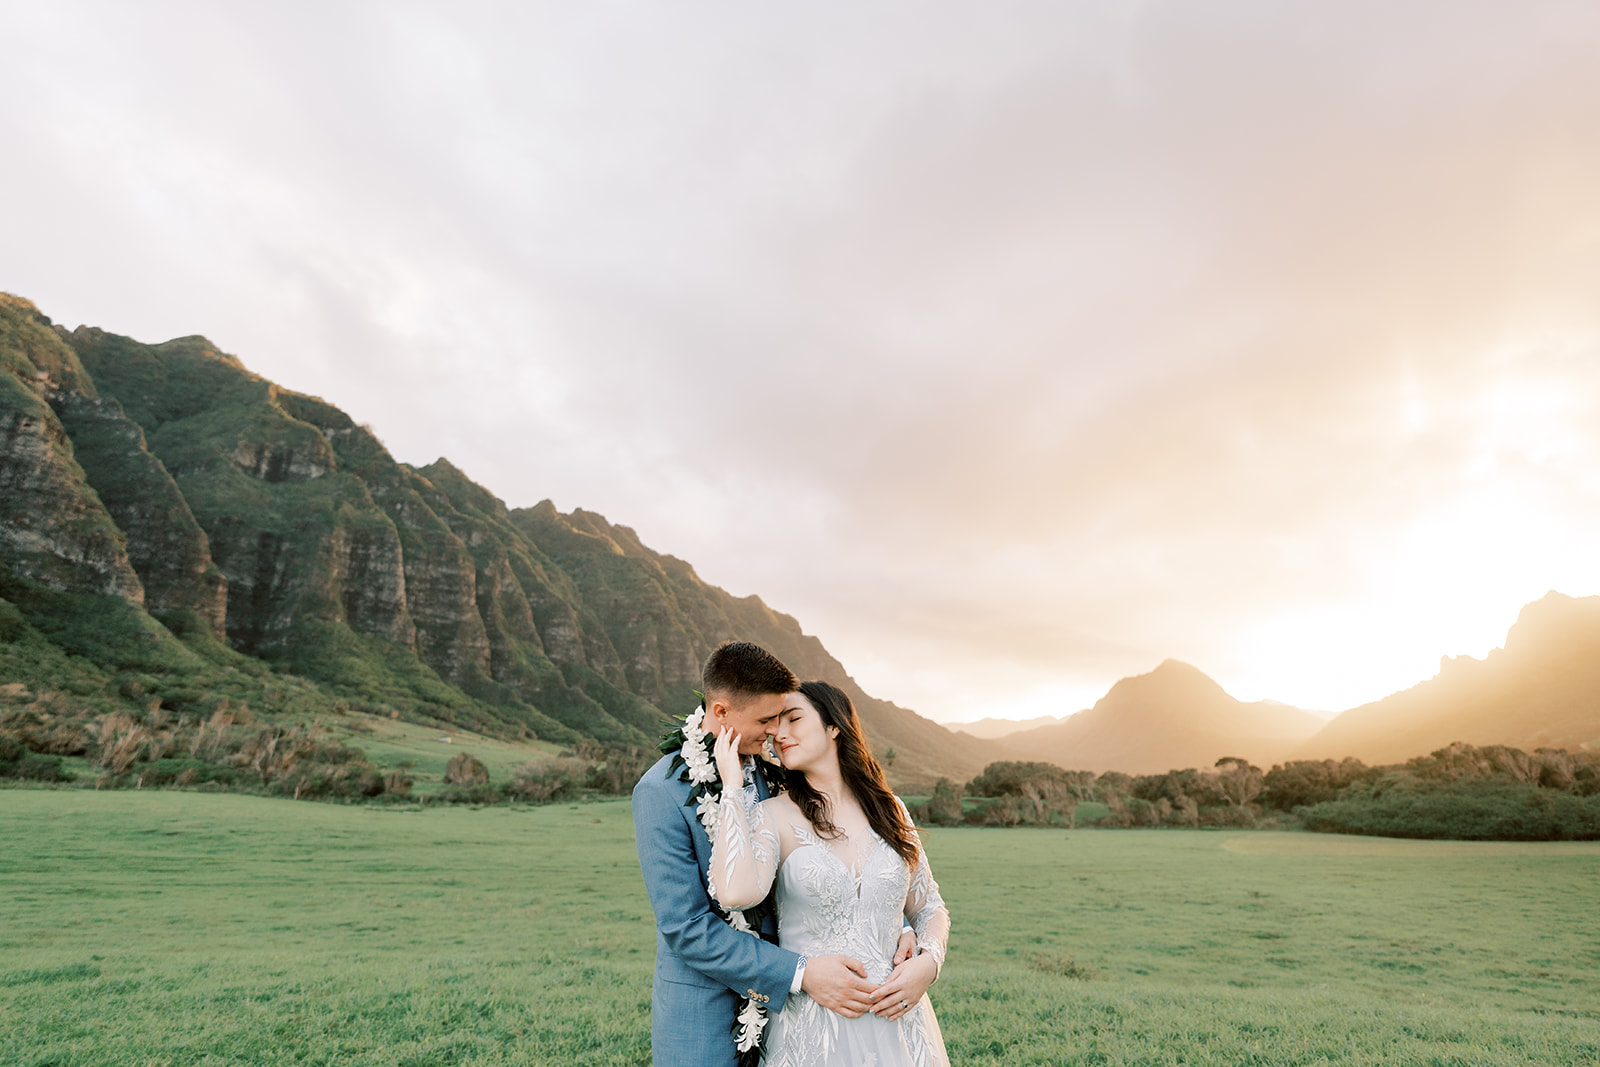 A bride and groom embrace in a grassy field during their hawaiian elopement.